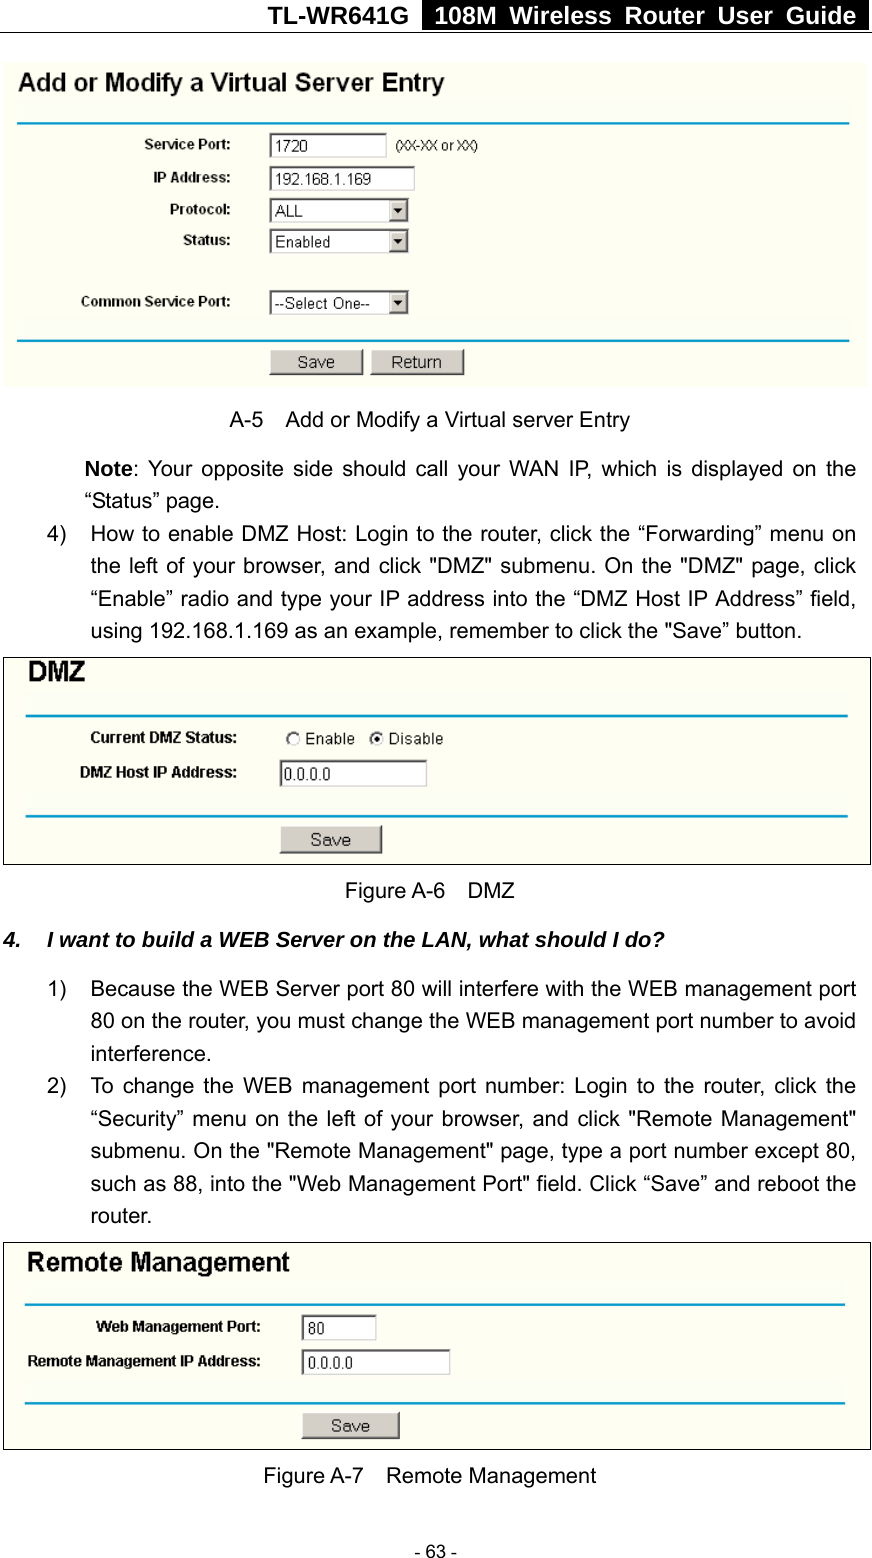 TL-WR641G   108M Wireless Router User Guide   A-5    Add or Modify a Virtual server Entry Note: Your opposite side should call your WAN IP, which is displayed on the “Status” page. 4)  How to enable DMZ Host: Login to the router, click the “Forwarding” menu on the left of your browser, and click &quot;DMZ&quot; submenu. On the &quot;DMZ&quot; page, click “Enable” radio and type your IP address into the “DMZ Host IP Address” field, using 192.168.1.169 as an example, remember to click the &quot;Save” button.    Figure A-6  DMZ 4.  I want to build a WEB Server on the LAN, what should I do? 1)  Because the WEB Server port 80 will interfere with the WEB management port 80 on the router, you must change the WEB management port number to avoid interference. 2)  To change the WEB management port number: Login to the router, click the “Security” menu on the left of your browser, and click &quot;Remote Management&quot; submenu. On the &quot;Remote Management&quot; page, type a port number except 80, such as 88, into the &quot;Web Management Port&quot; field. Click “Save” and reboot the router.  Figure A-7  Remote Management  - 63 - 